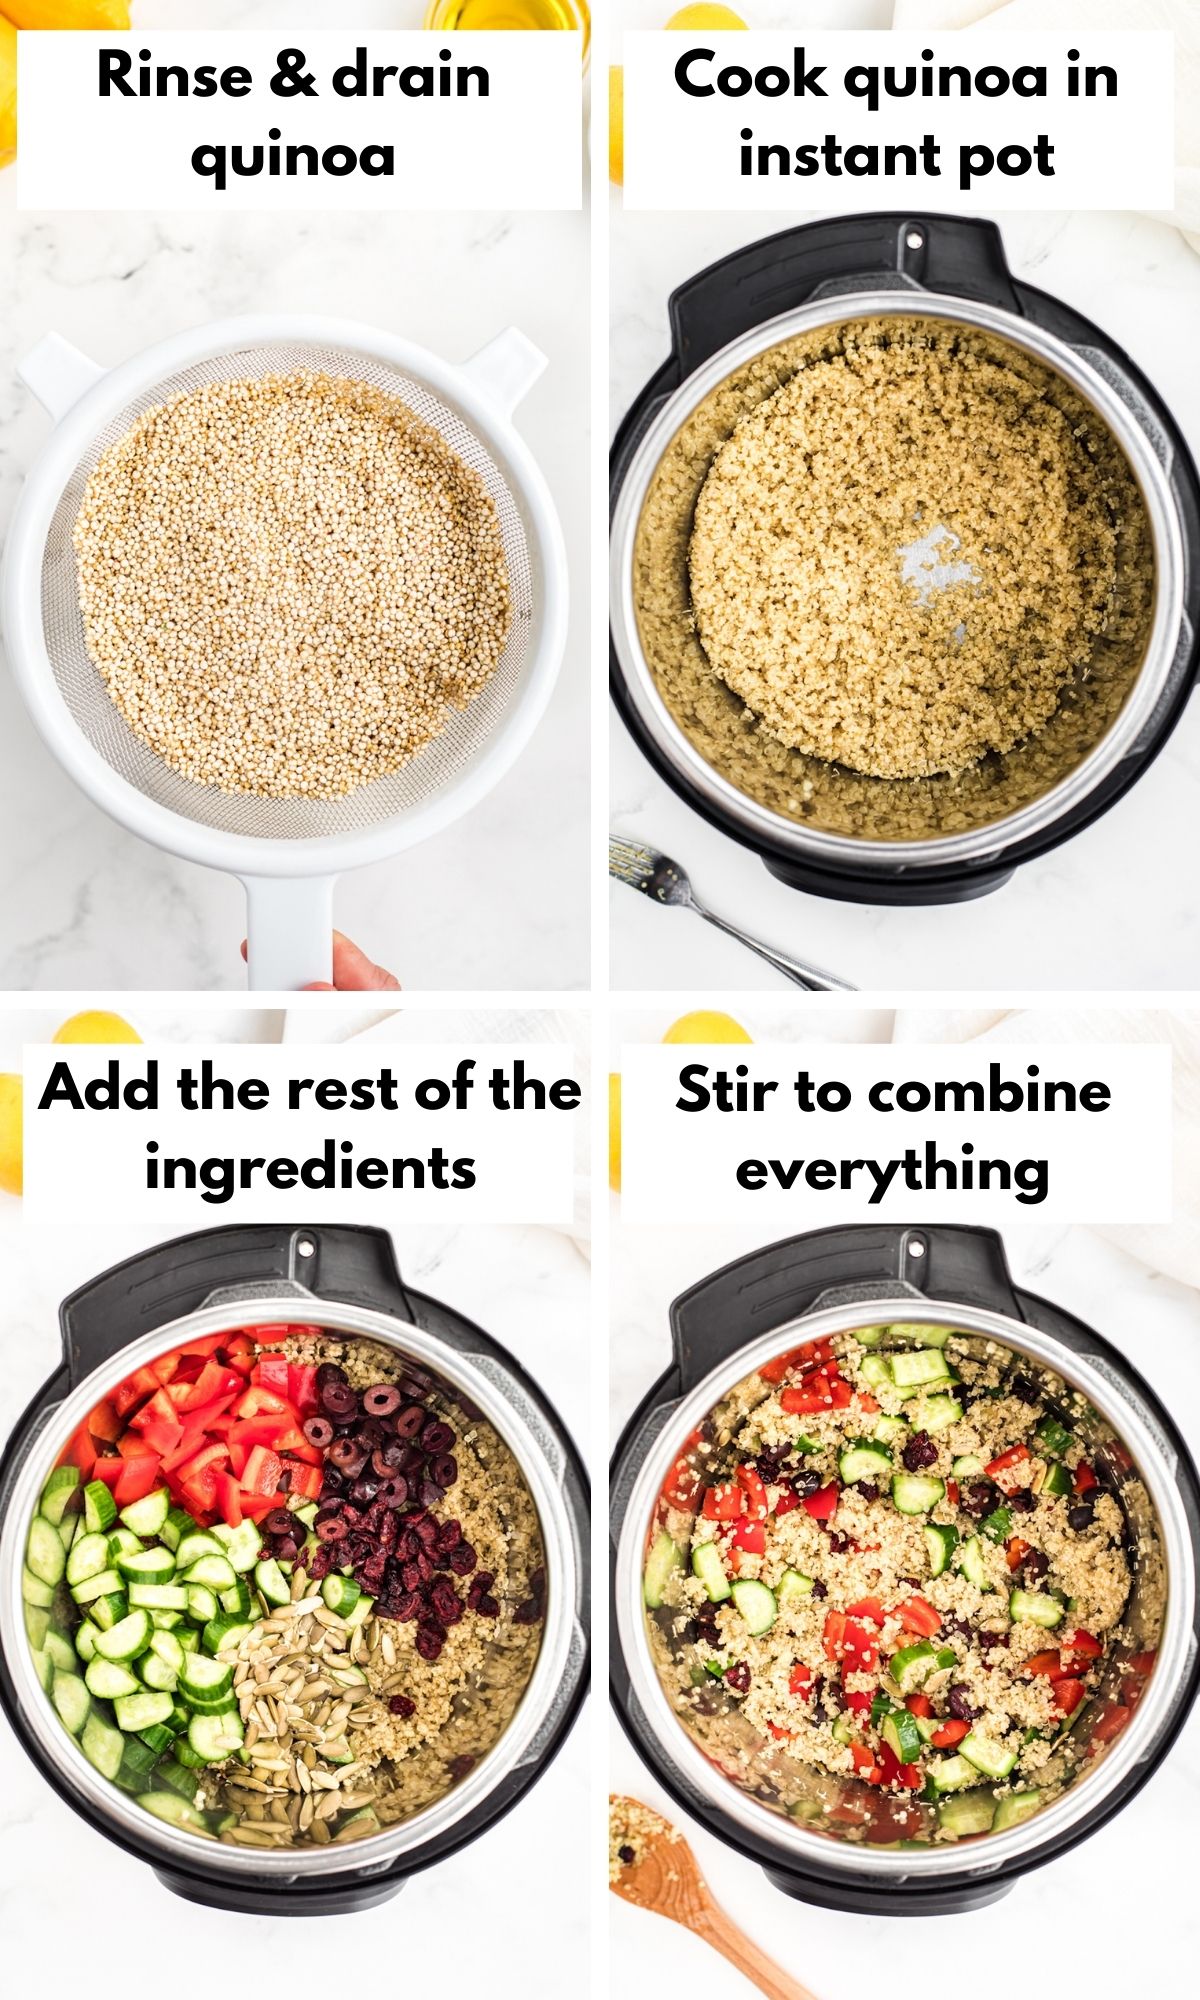 Pictures show how to make instant pot quinoa.